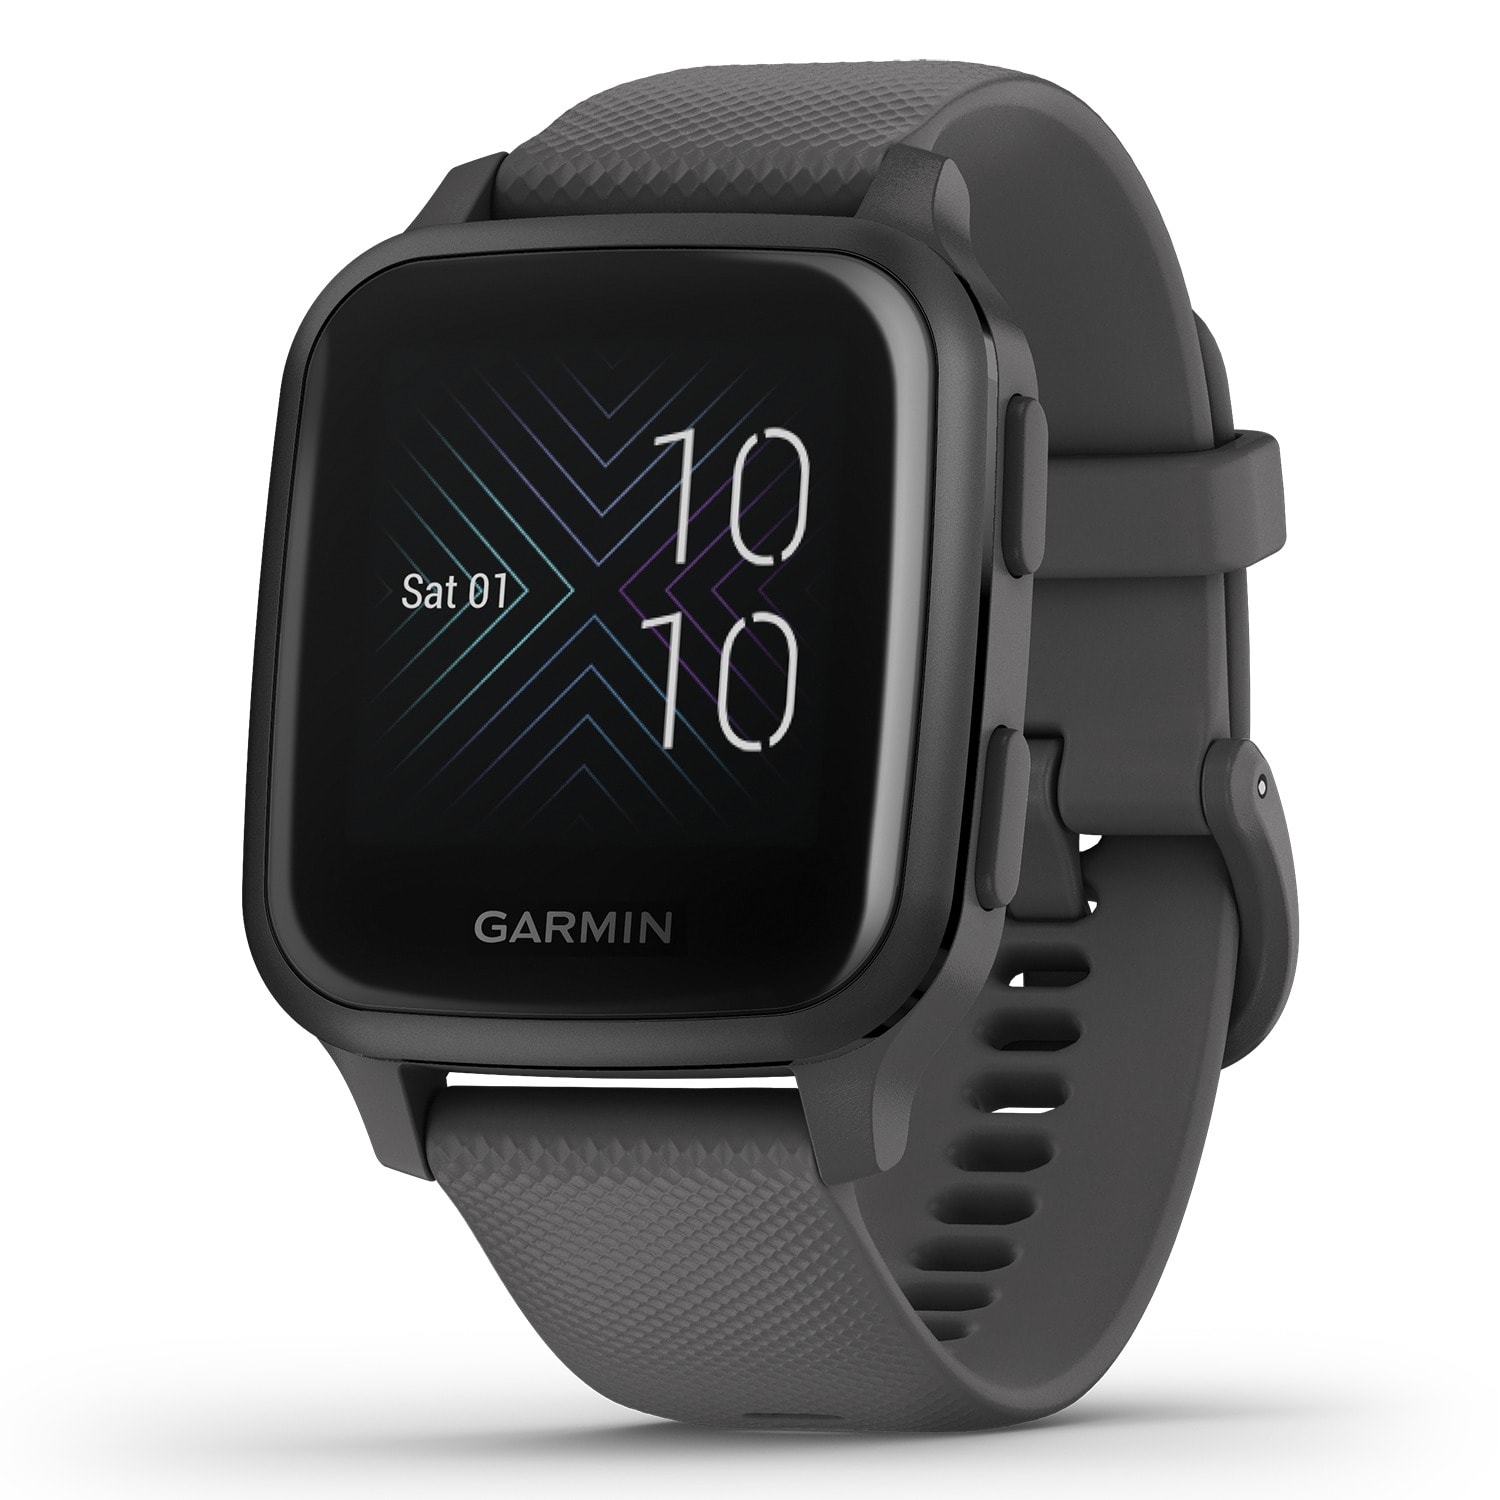  Garmin 010-02427-00 Venu Sq, GPS Smartwatch with Bright  Touchscreen Display, Up to 6 Days of Battery Life, Slate Aluminum Bezel  with Shadow Gray Case and Slate Silicone Band : Electronics